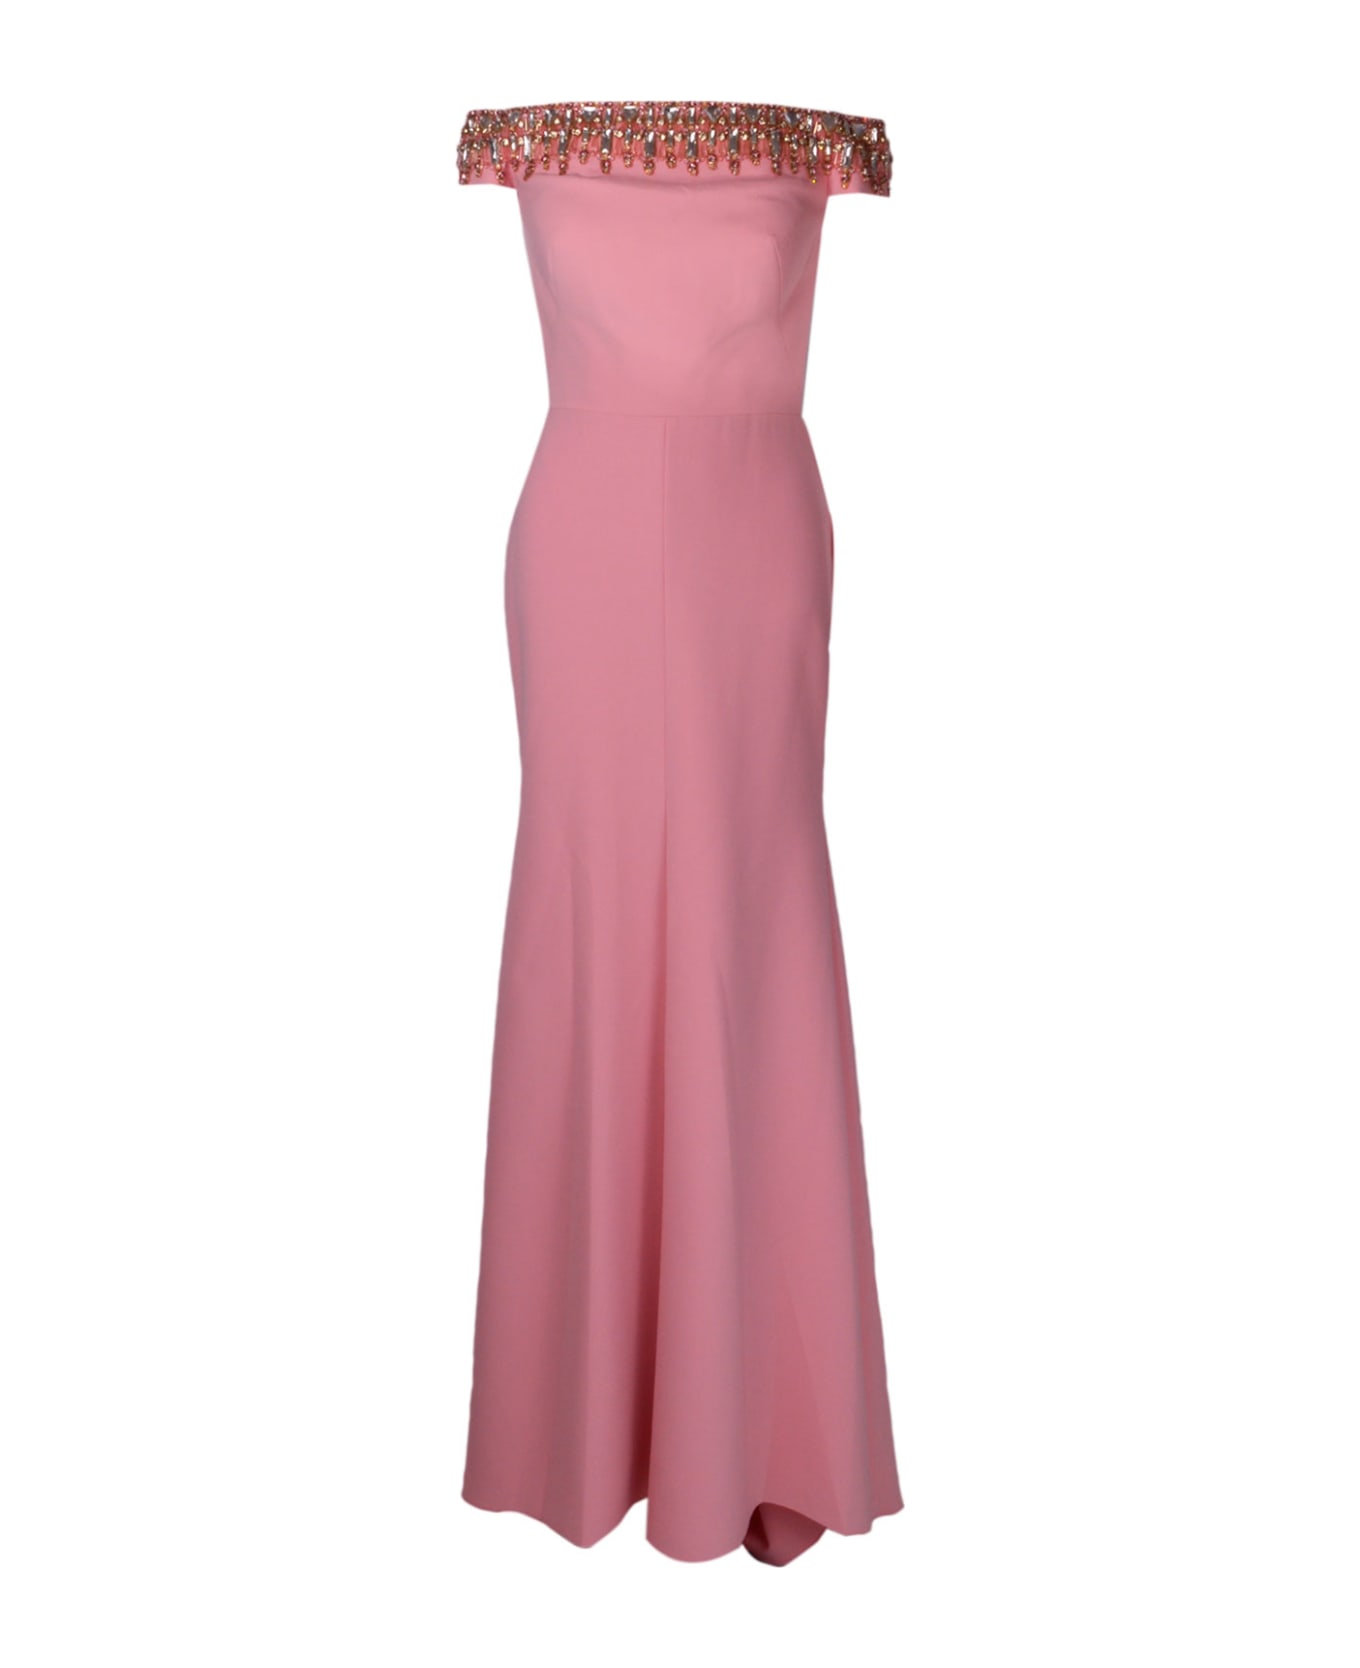 Jenny Packham Dress With Crystals - Pink